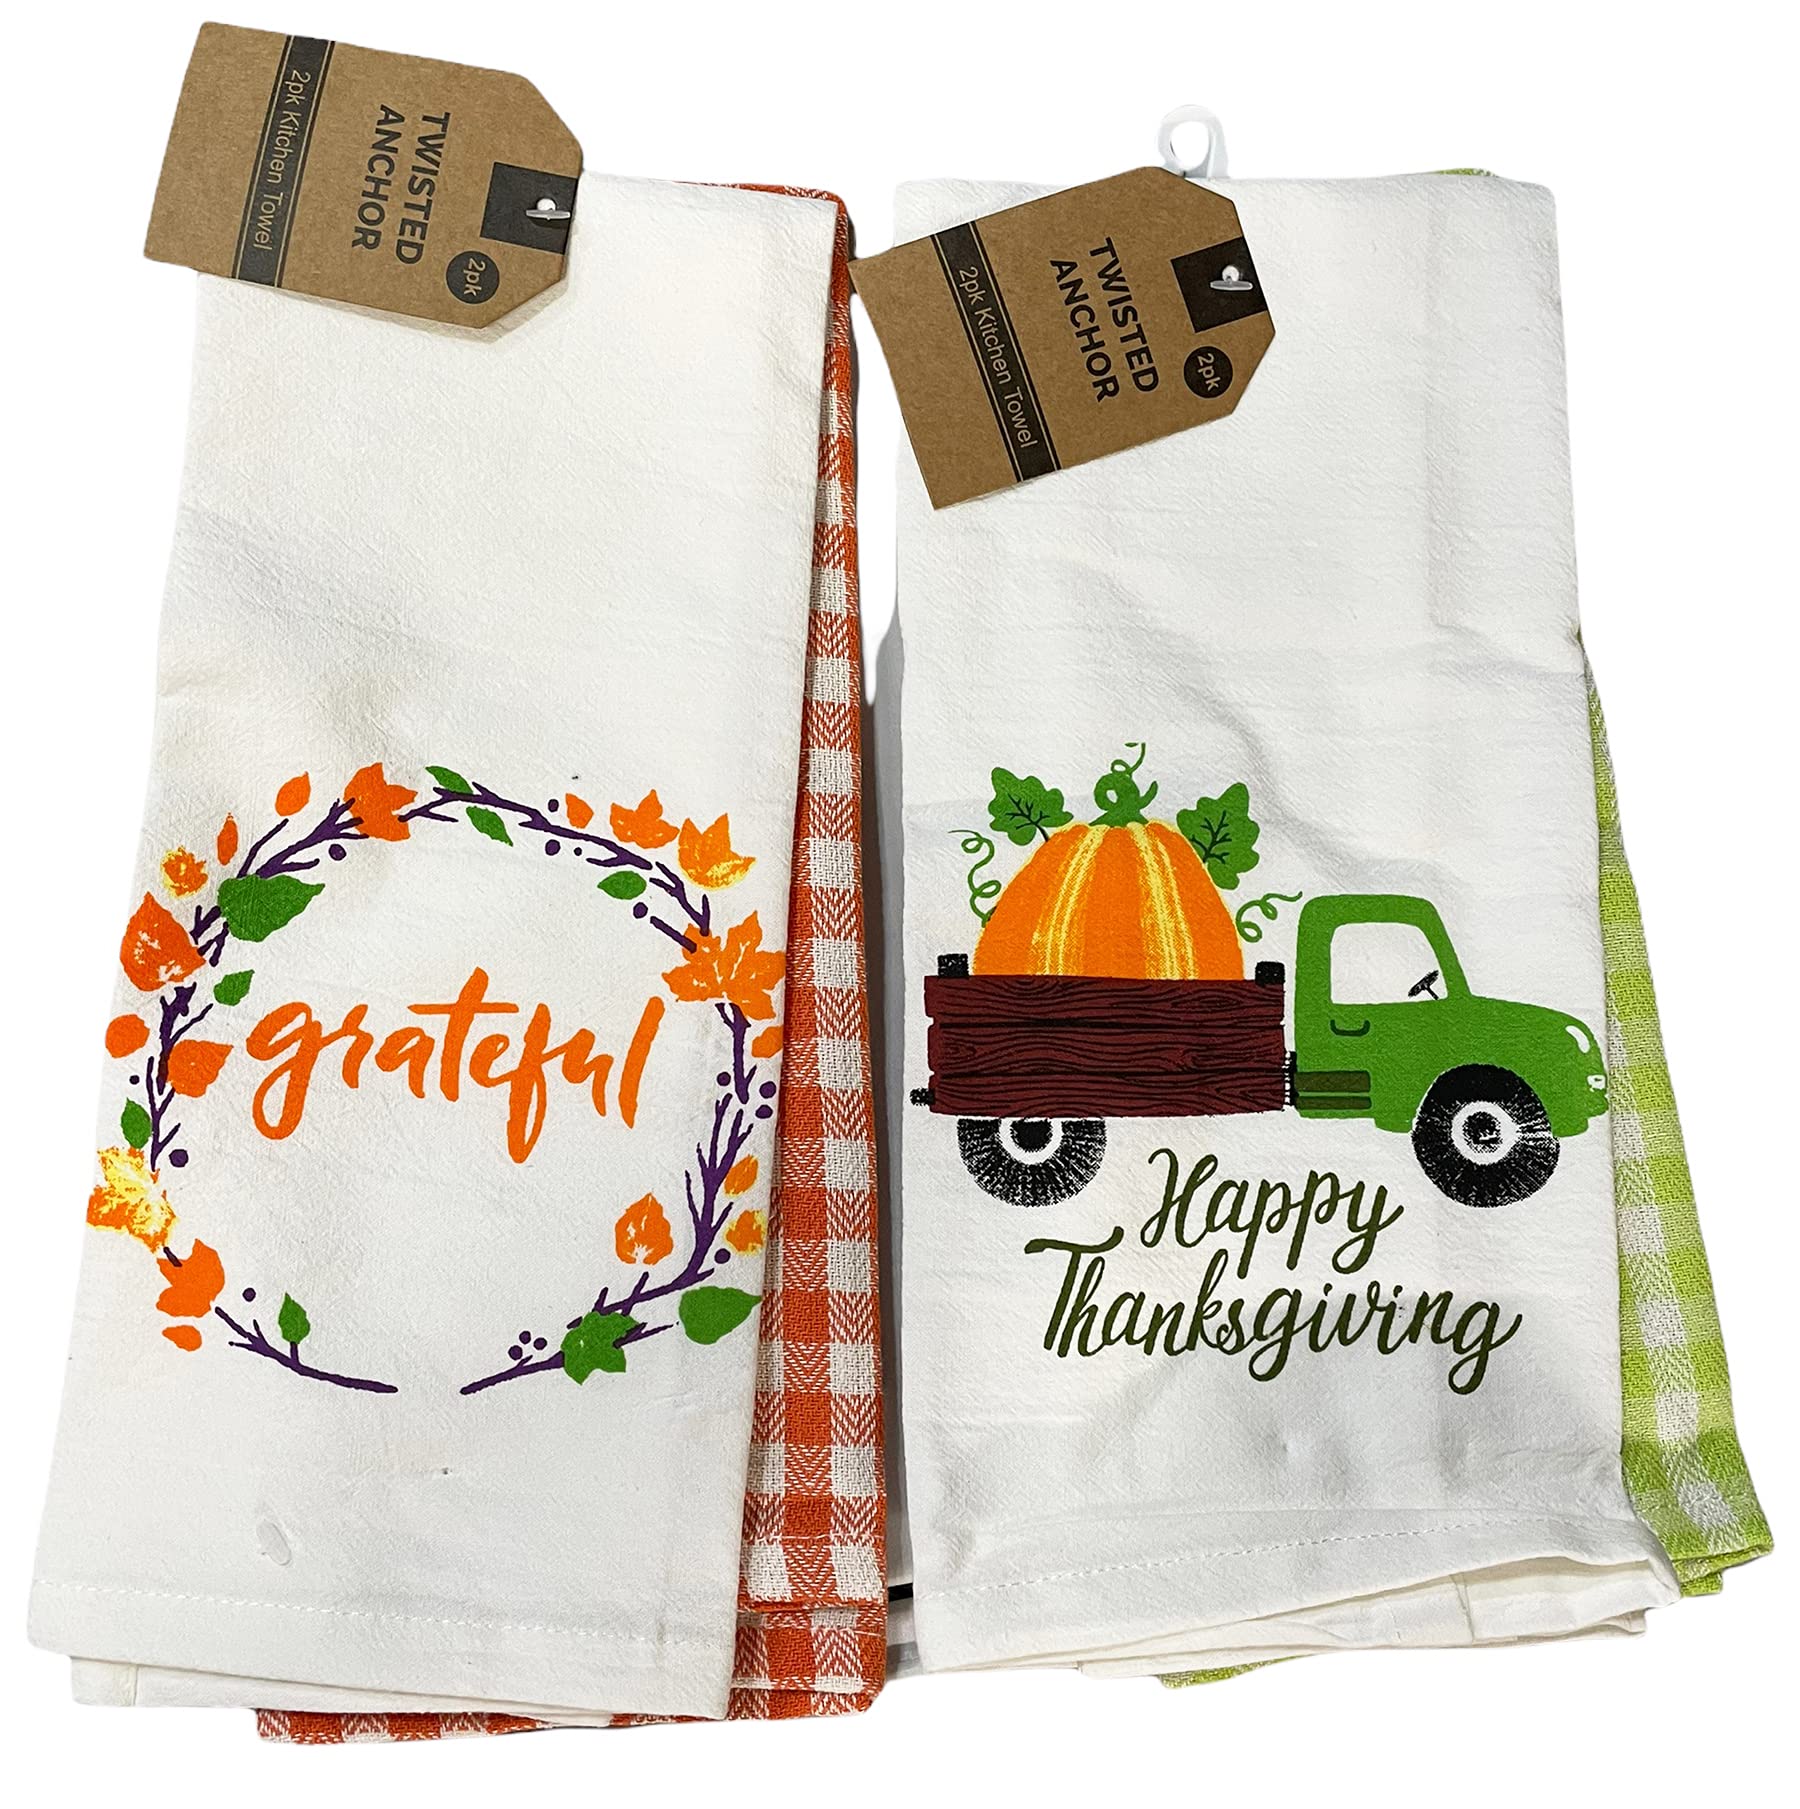 Twisted Anchor Trading Company Fall Kitchen Towels Gift Set - 8 pc Plaid Kitchen Towels, Thanksgiving Fall Kitchen Towel Set, Flour Sack Kitchen Towels - Comes in Organza Gift Bag